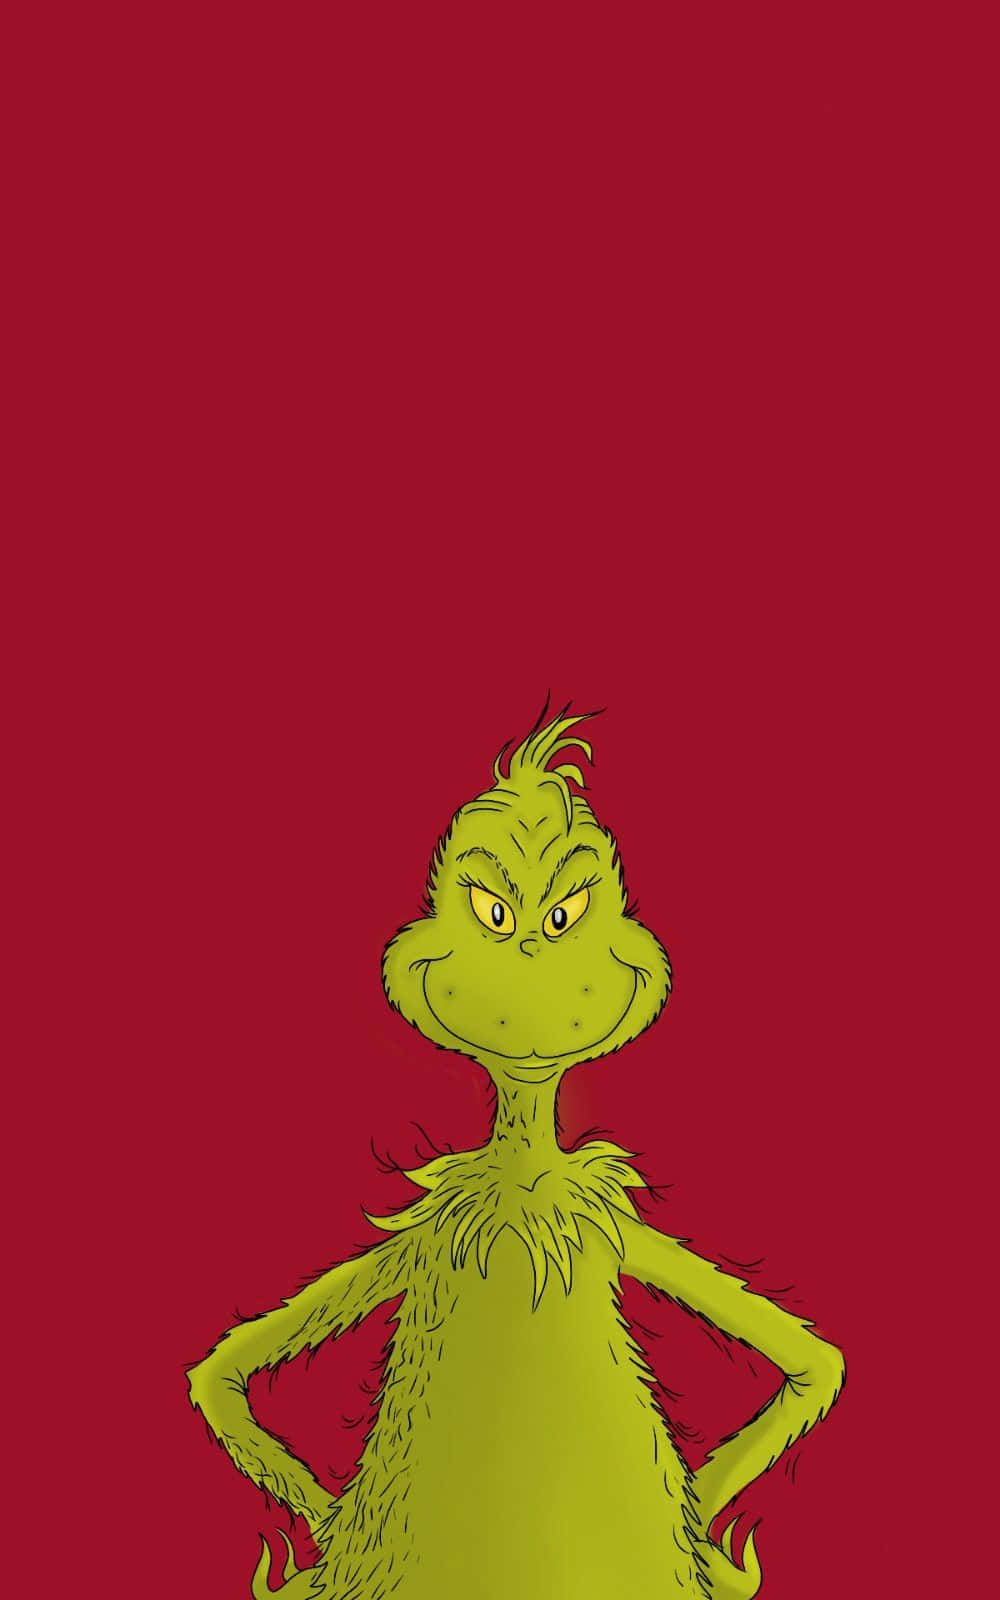 Grinch Red Background Wallpaper